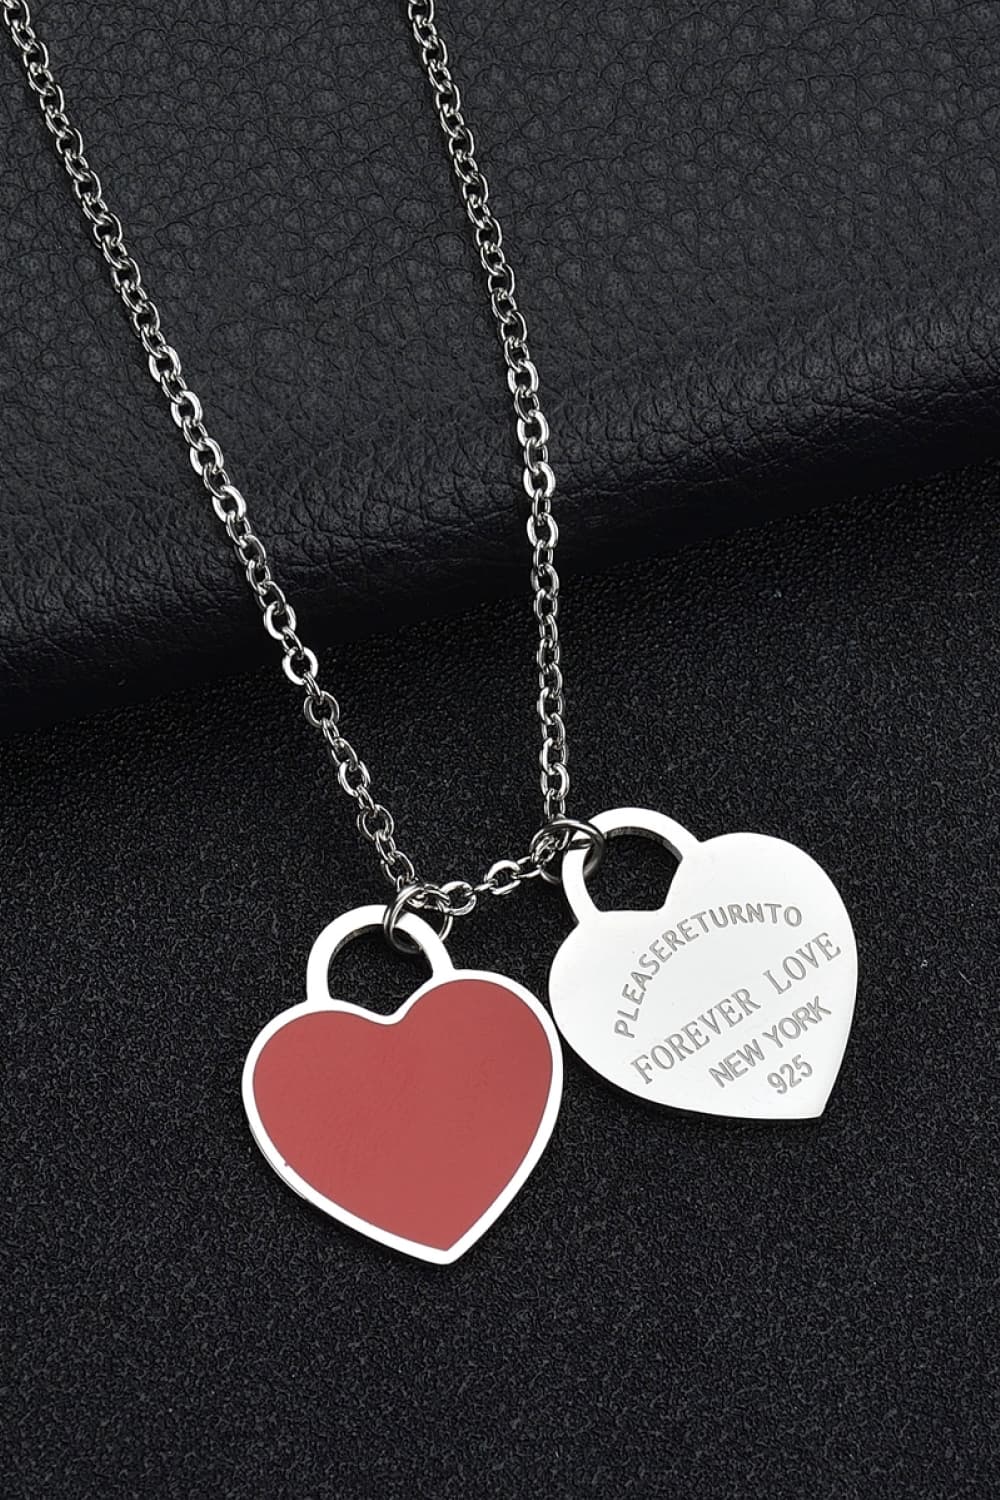 Please Return To Heart Pendant Stainless Steel Necklace